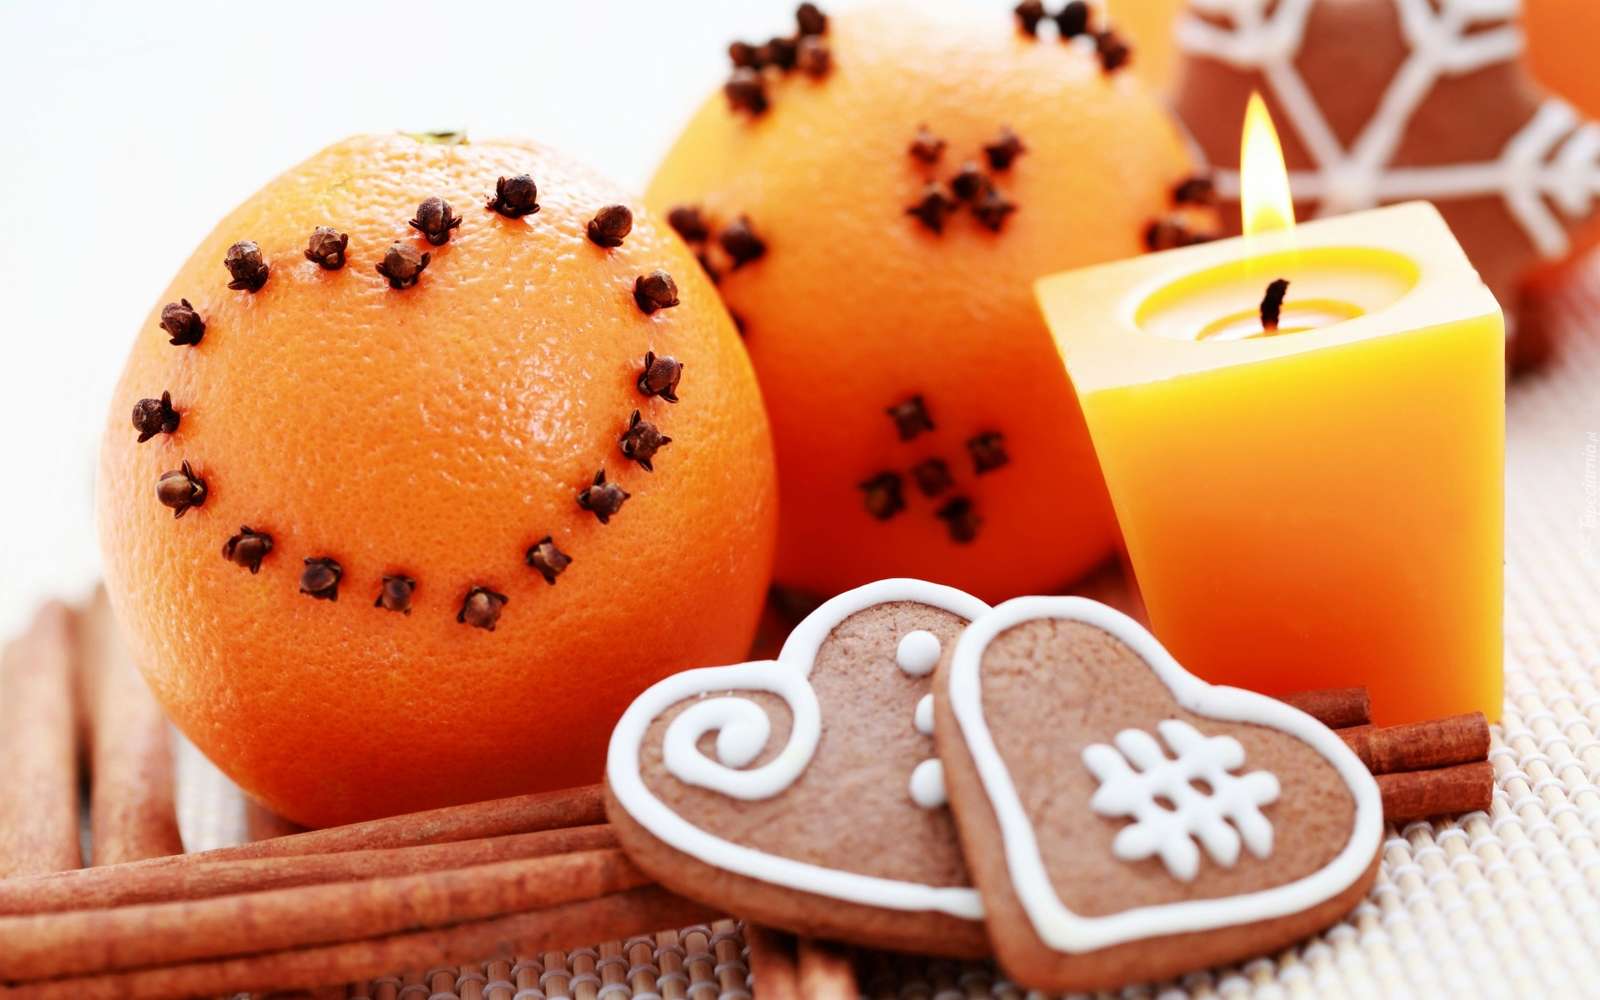 Oranges and gingerbreads next to a candle and cinnamon jigsaw puzzle online